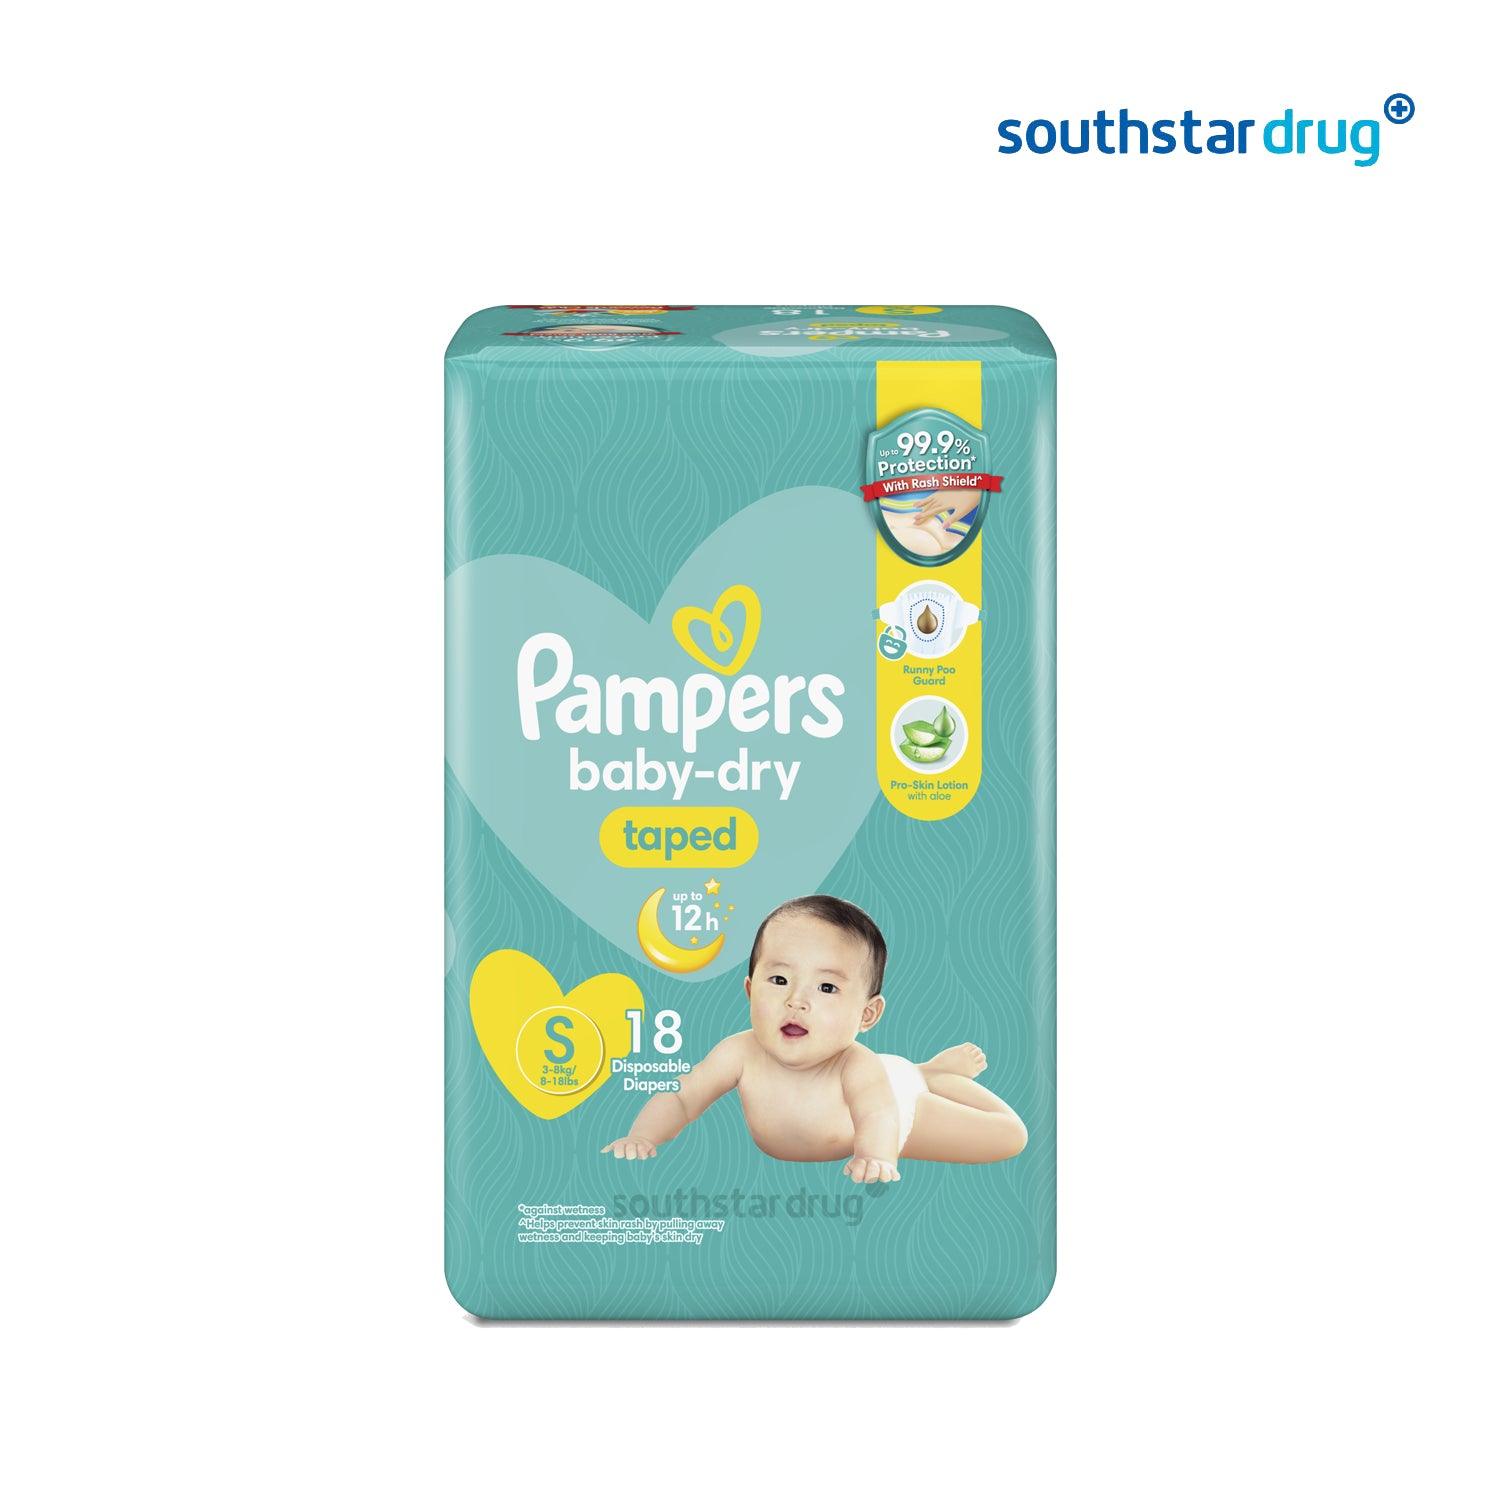 Pampers All-Round Protection Diaper Pants Small, 7 Count Price, Uses, Side  Effects, Composition - Apollo Pharmacy